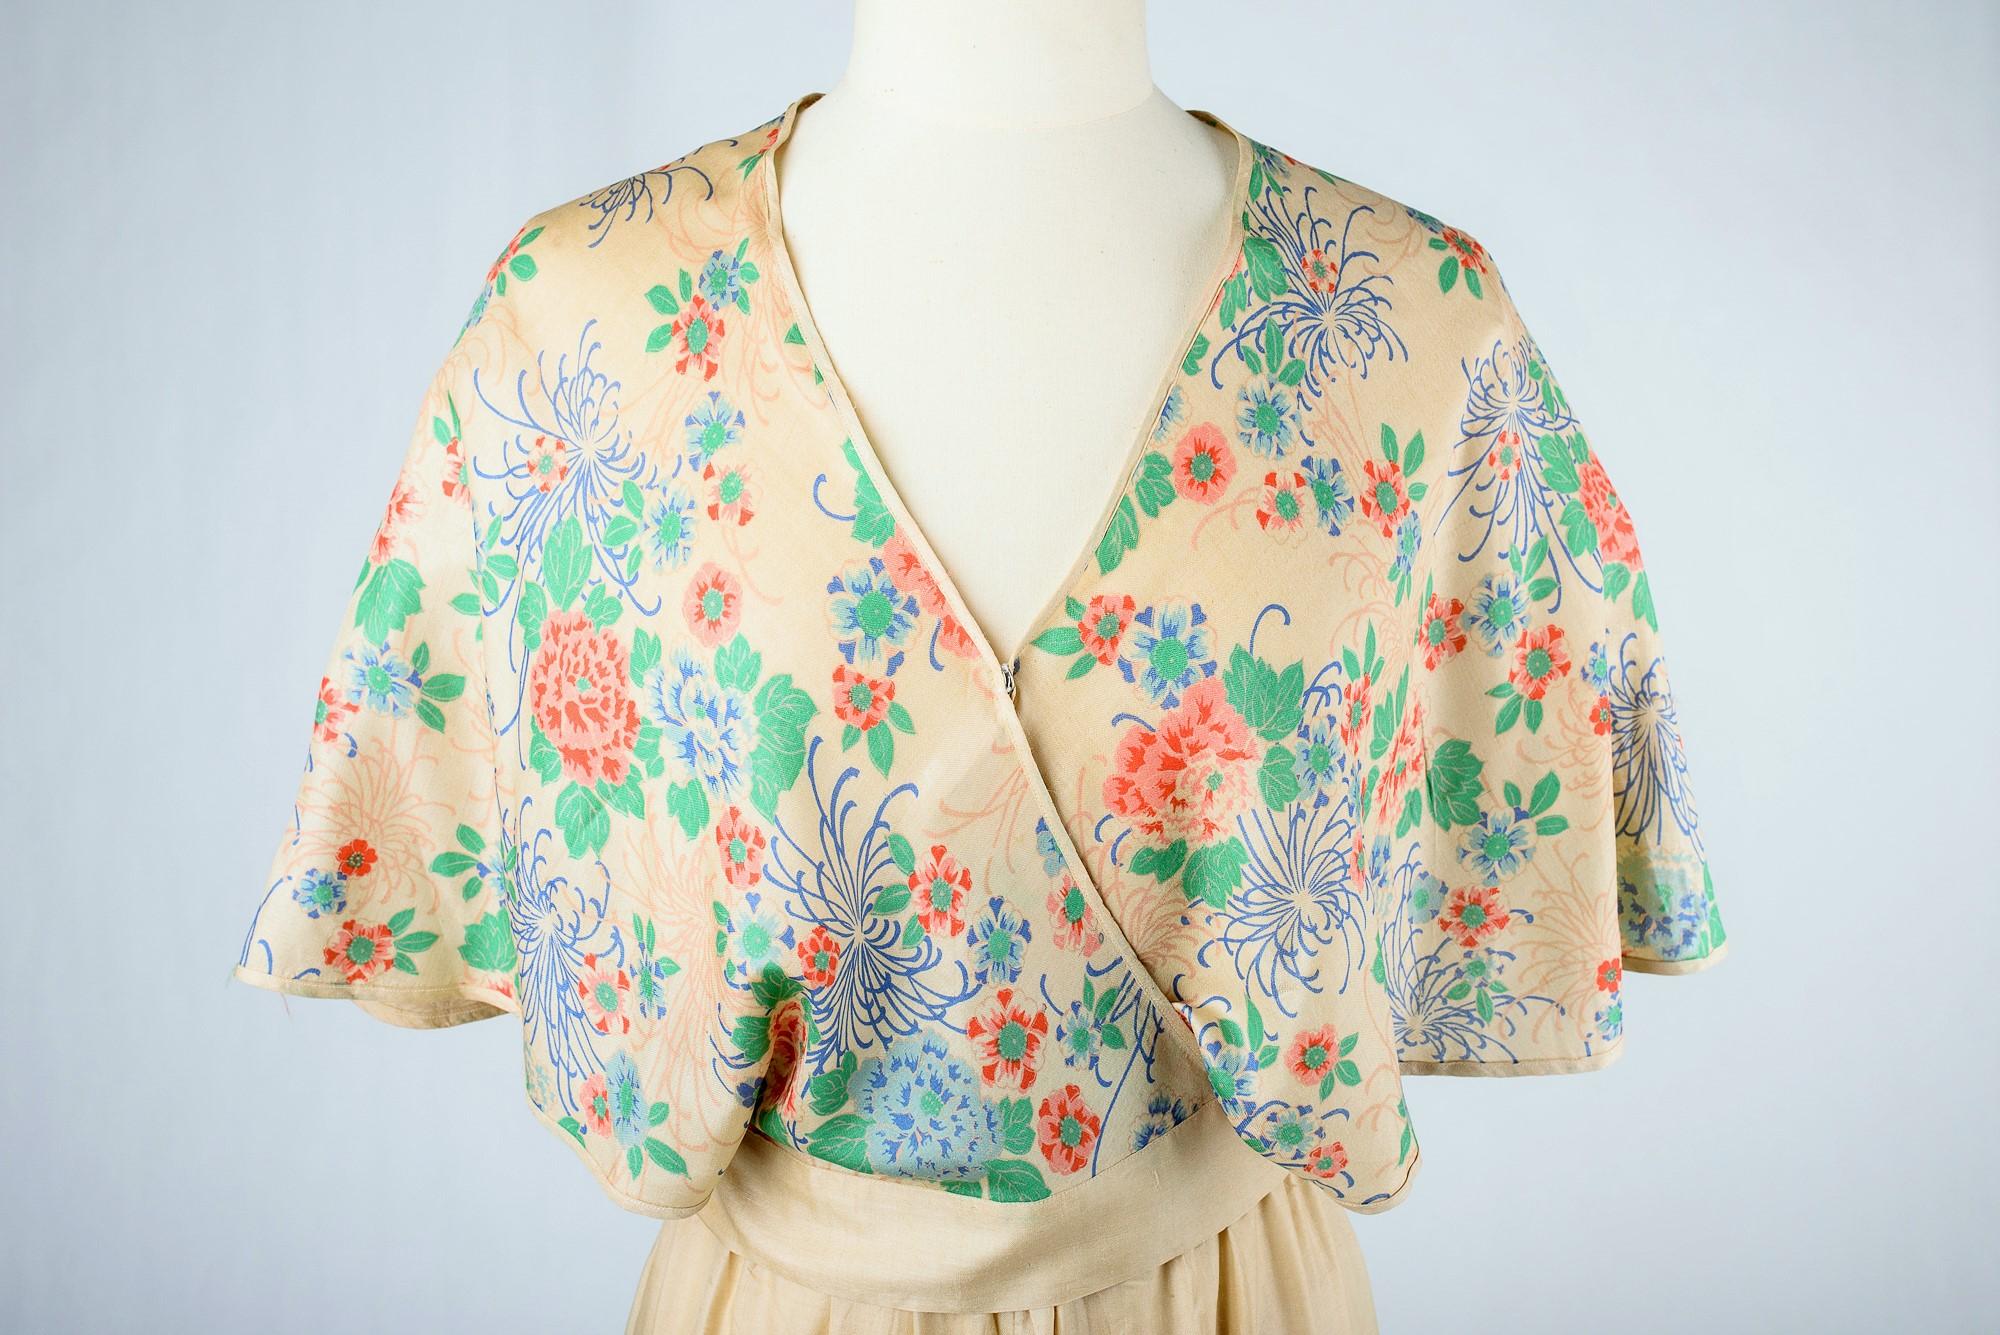 Circa 1935

France

Beautiful evening pajamas, two pieces Cache-Coeur and pants in cream silk pongee printed with Japanese motifs and dating from the 1930s. Beautiful print with bunches of chrysanthemums for the blouse with large panels covering the